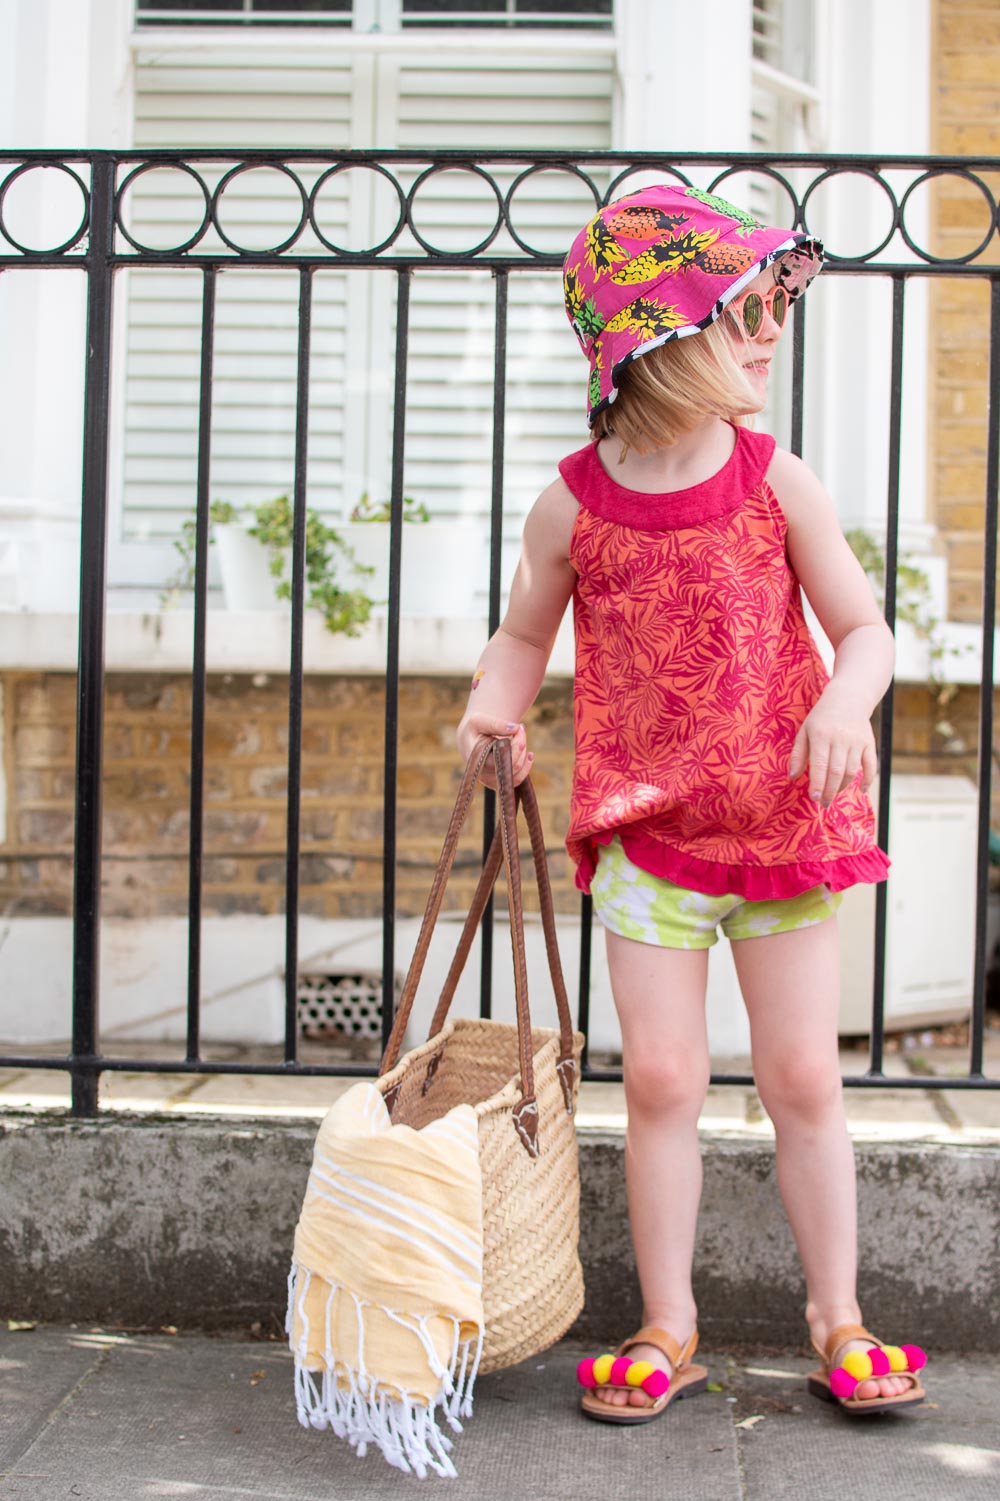 Daisy wears, pink sleeveless top from Loopster (preloved children's clothing), green shorts and a patterned sun hat from Little Hotdog Watson